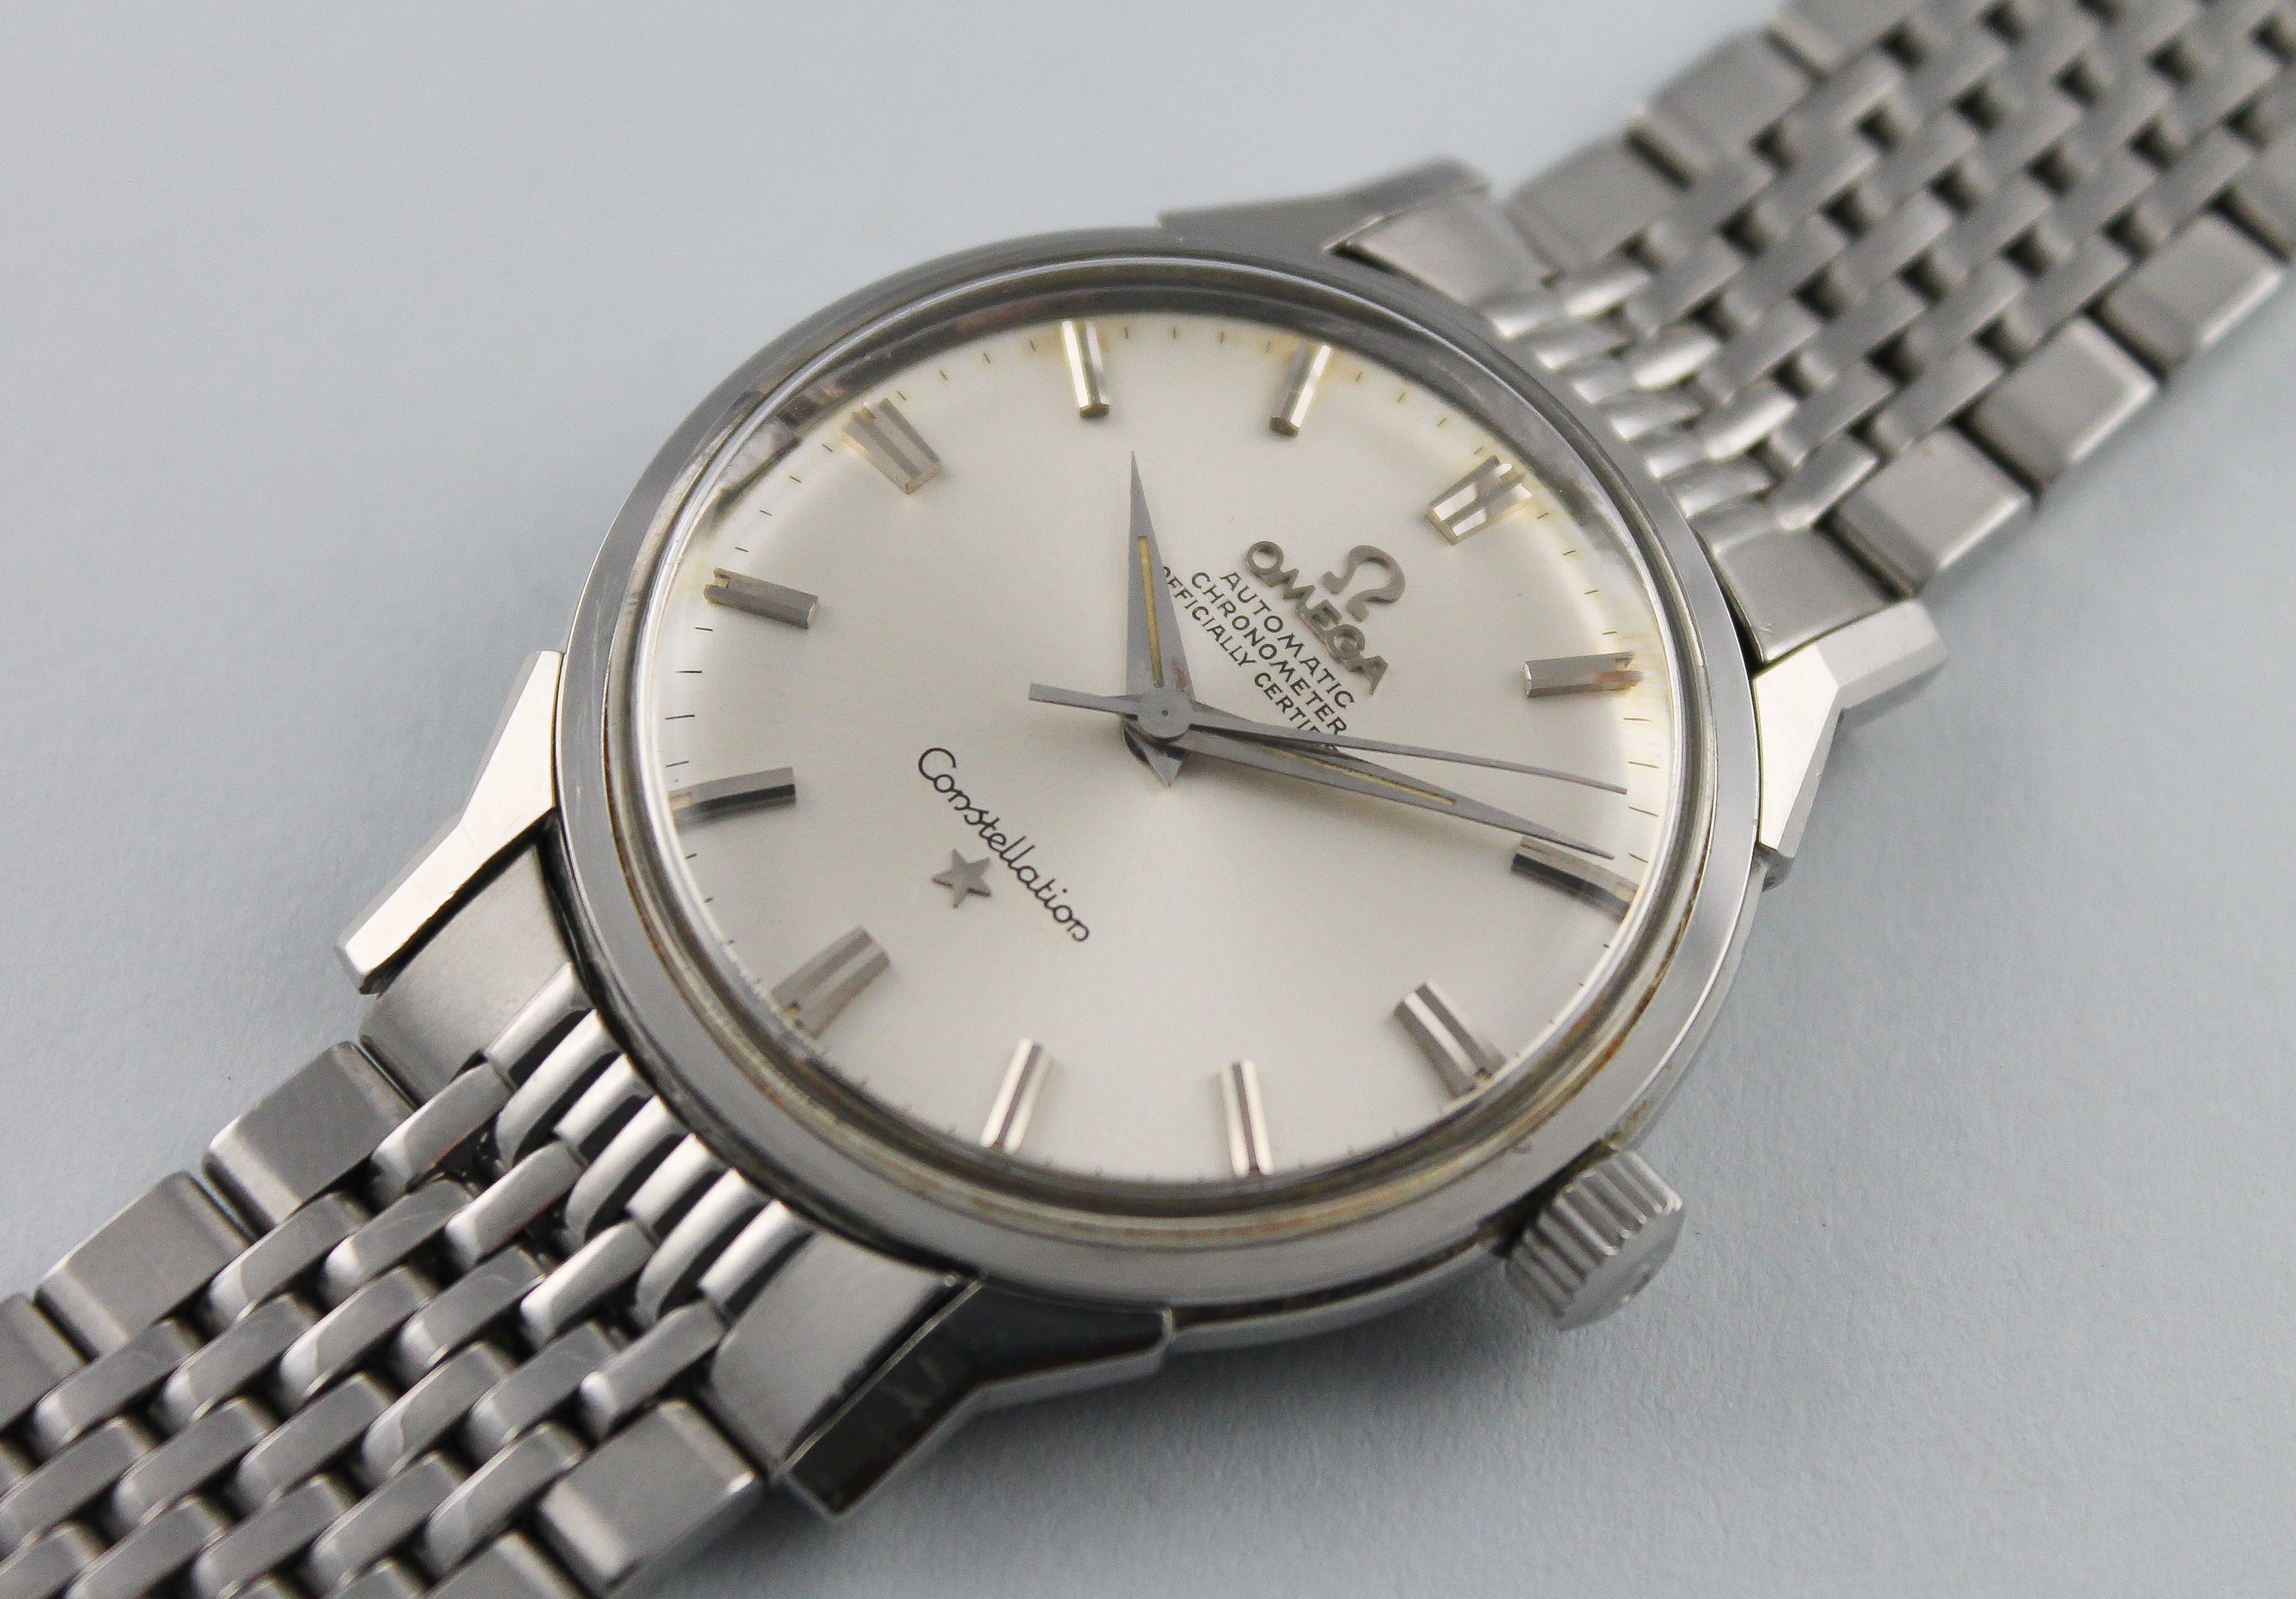 OMEGA Constellation Automatic ref 167.005 Cal 551 (1966)